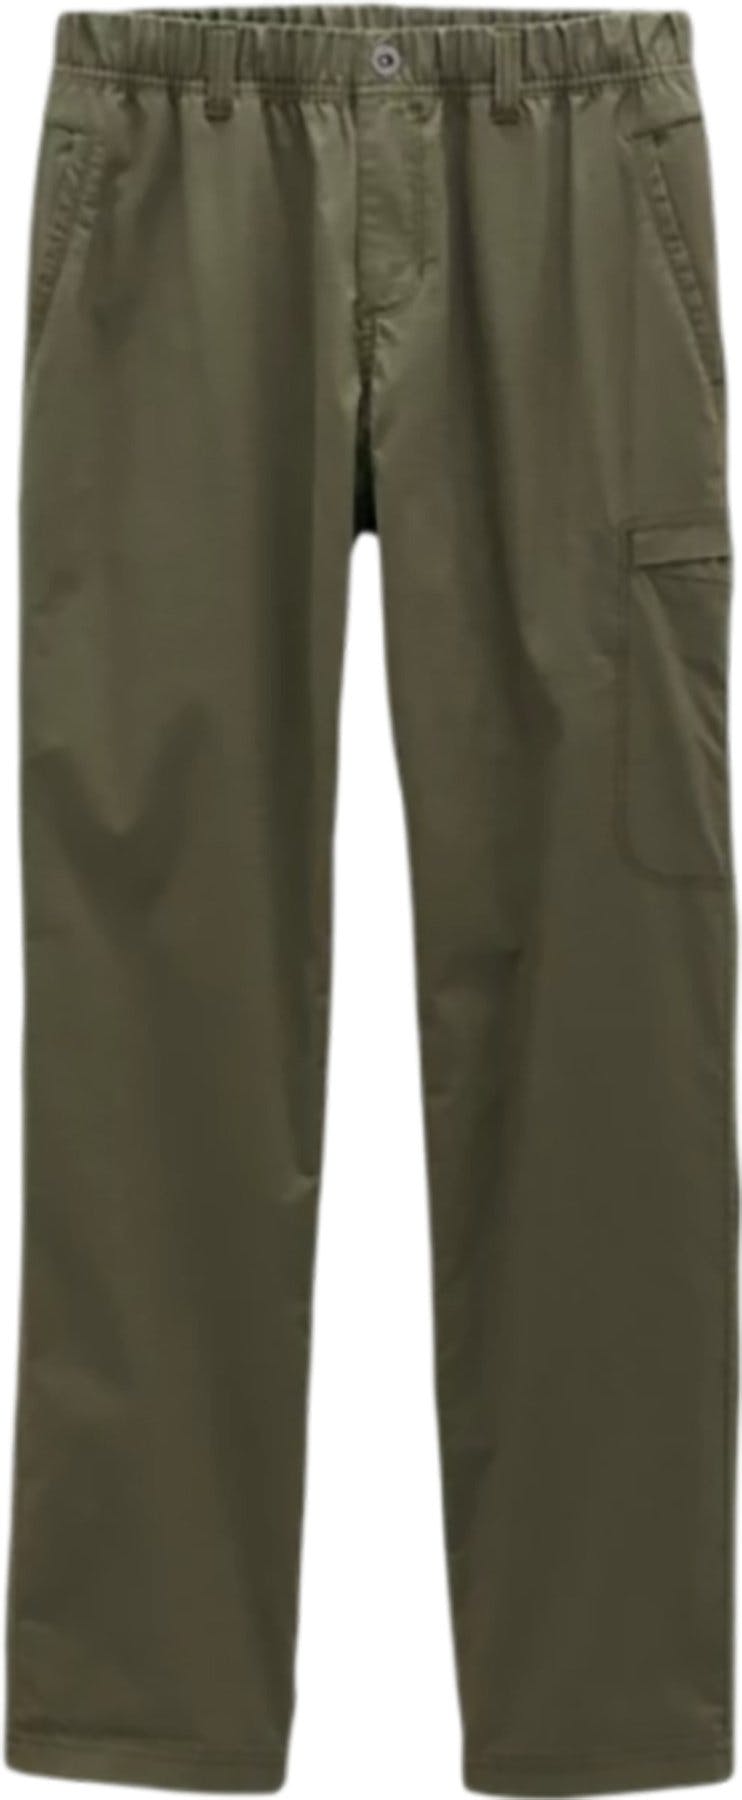 Product image for Double Peak Pant - Women's